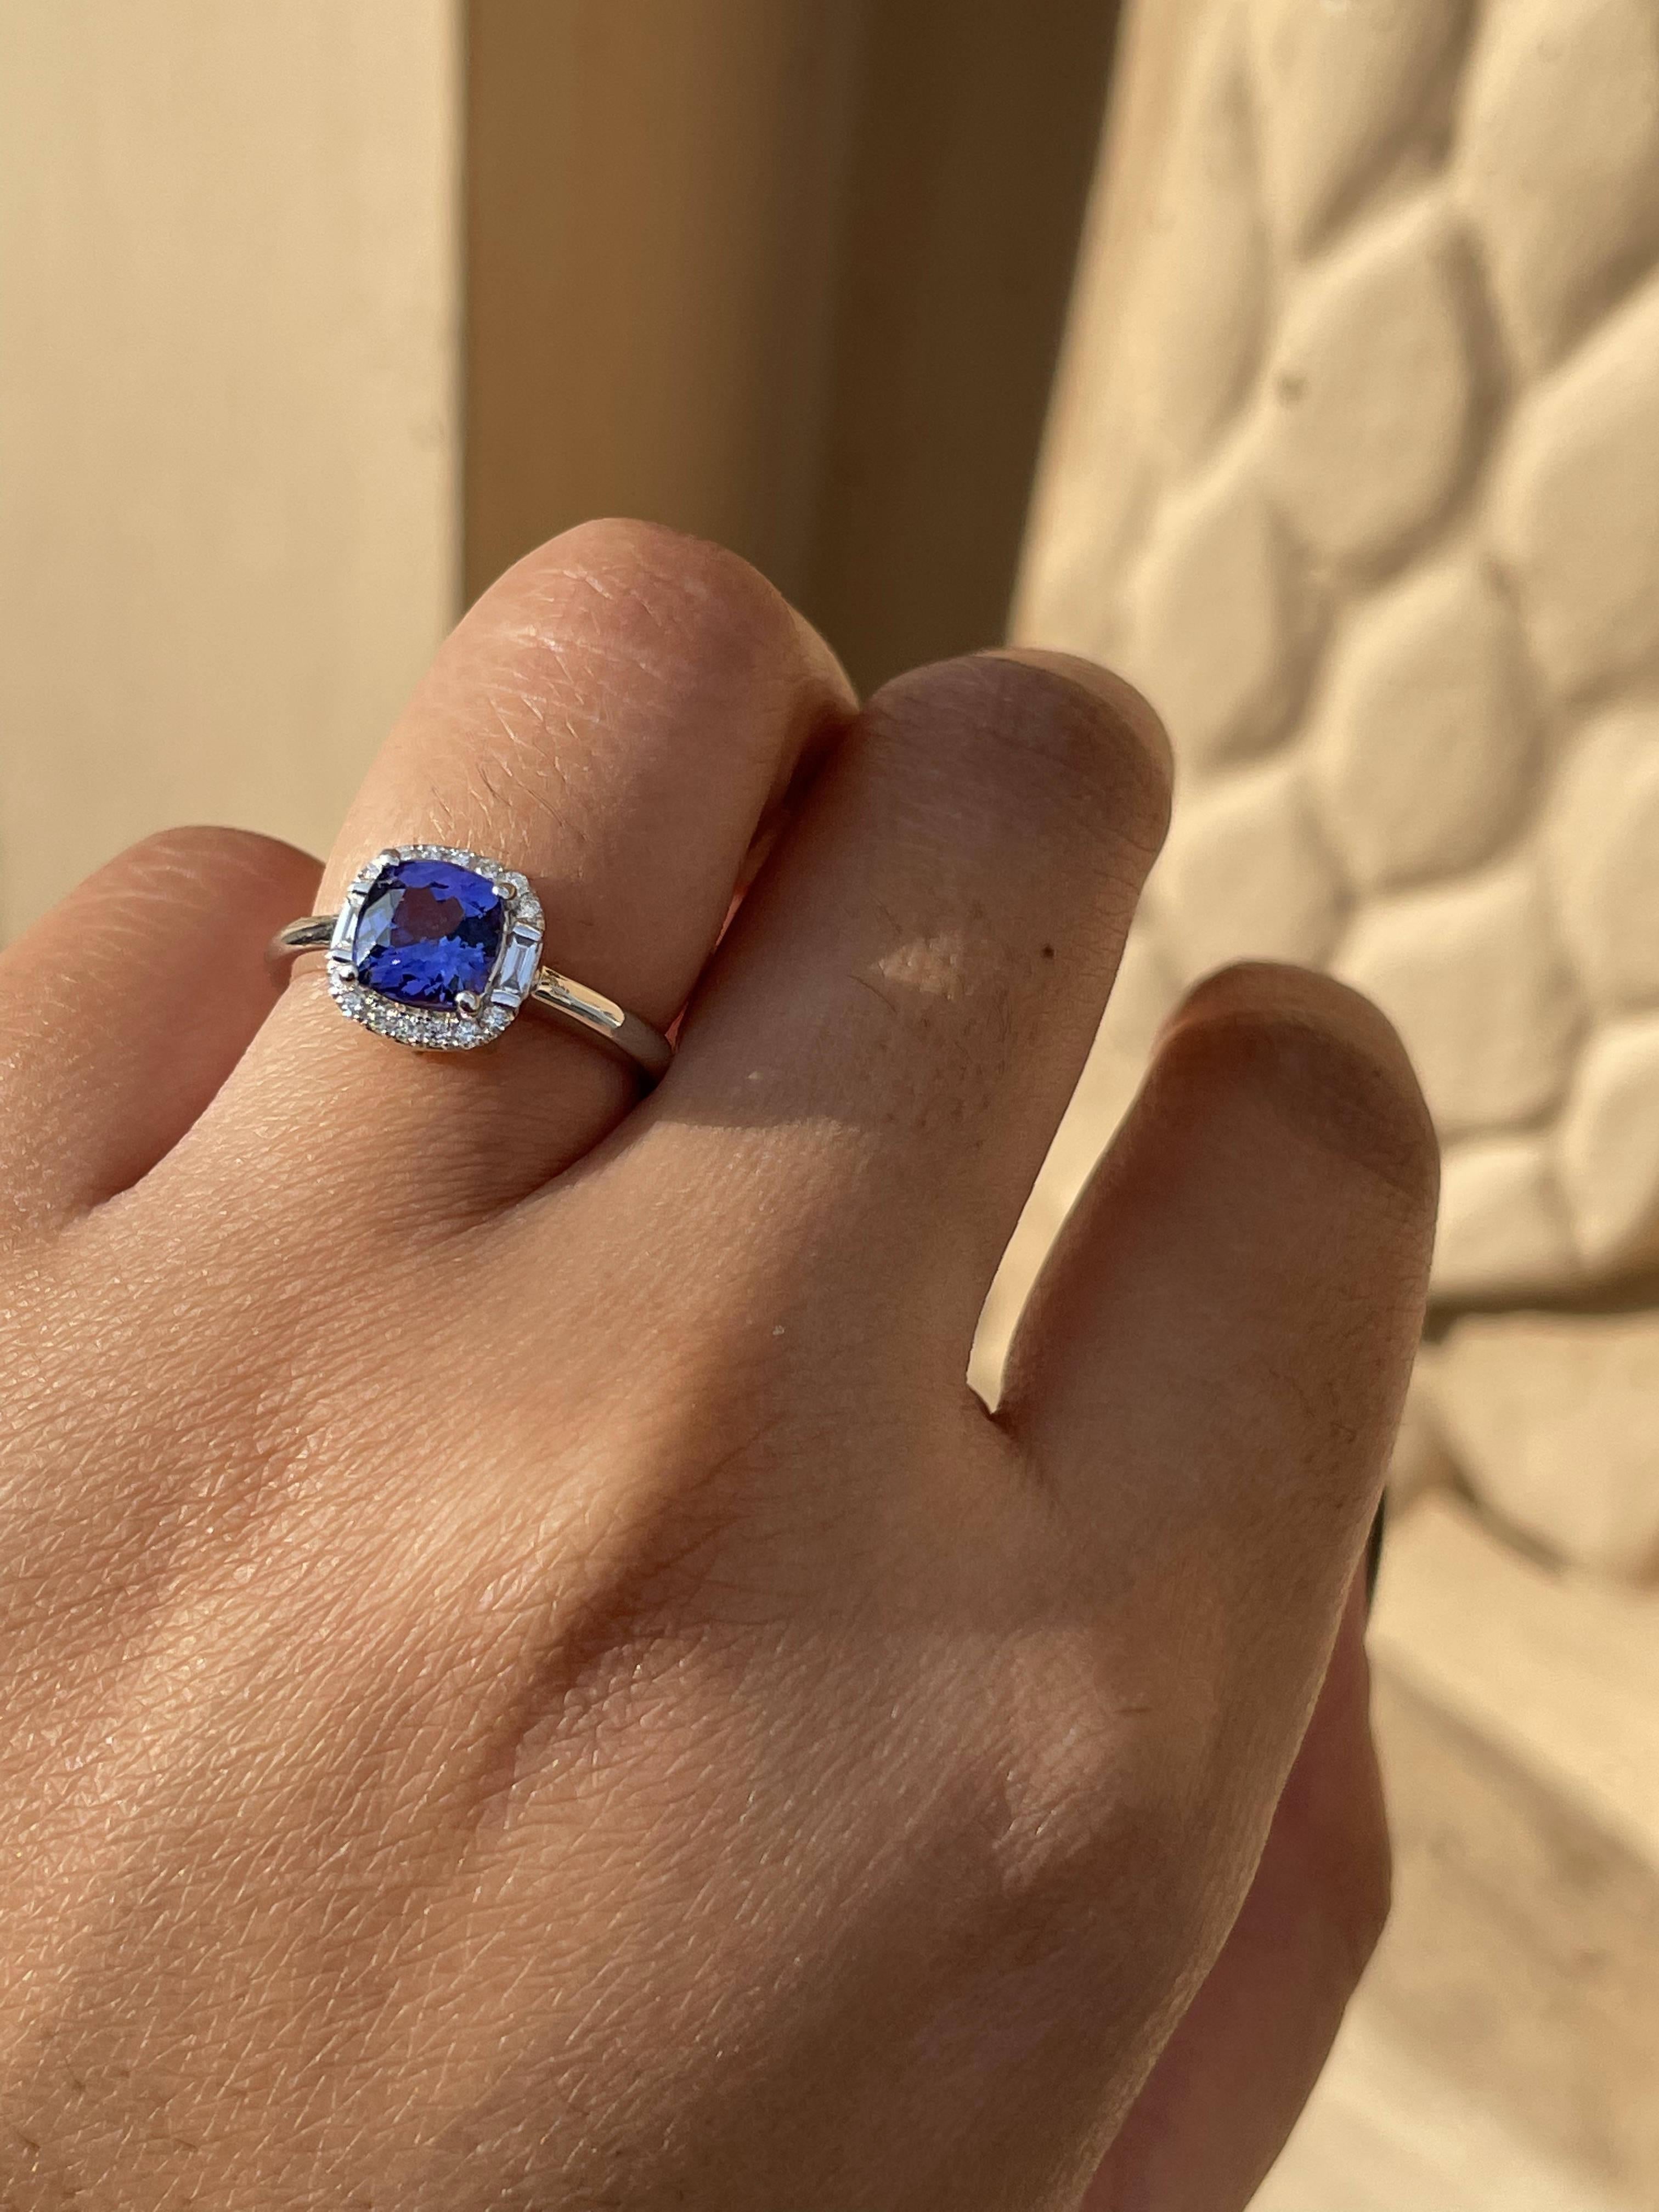 For Sale:  18k Solid White Gold Cushion Cut Tanzanite and Diamond Ring 8